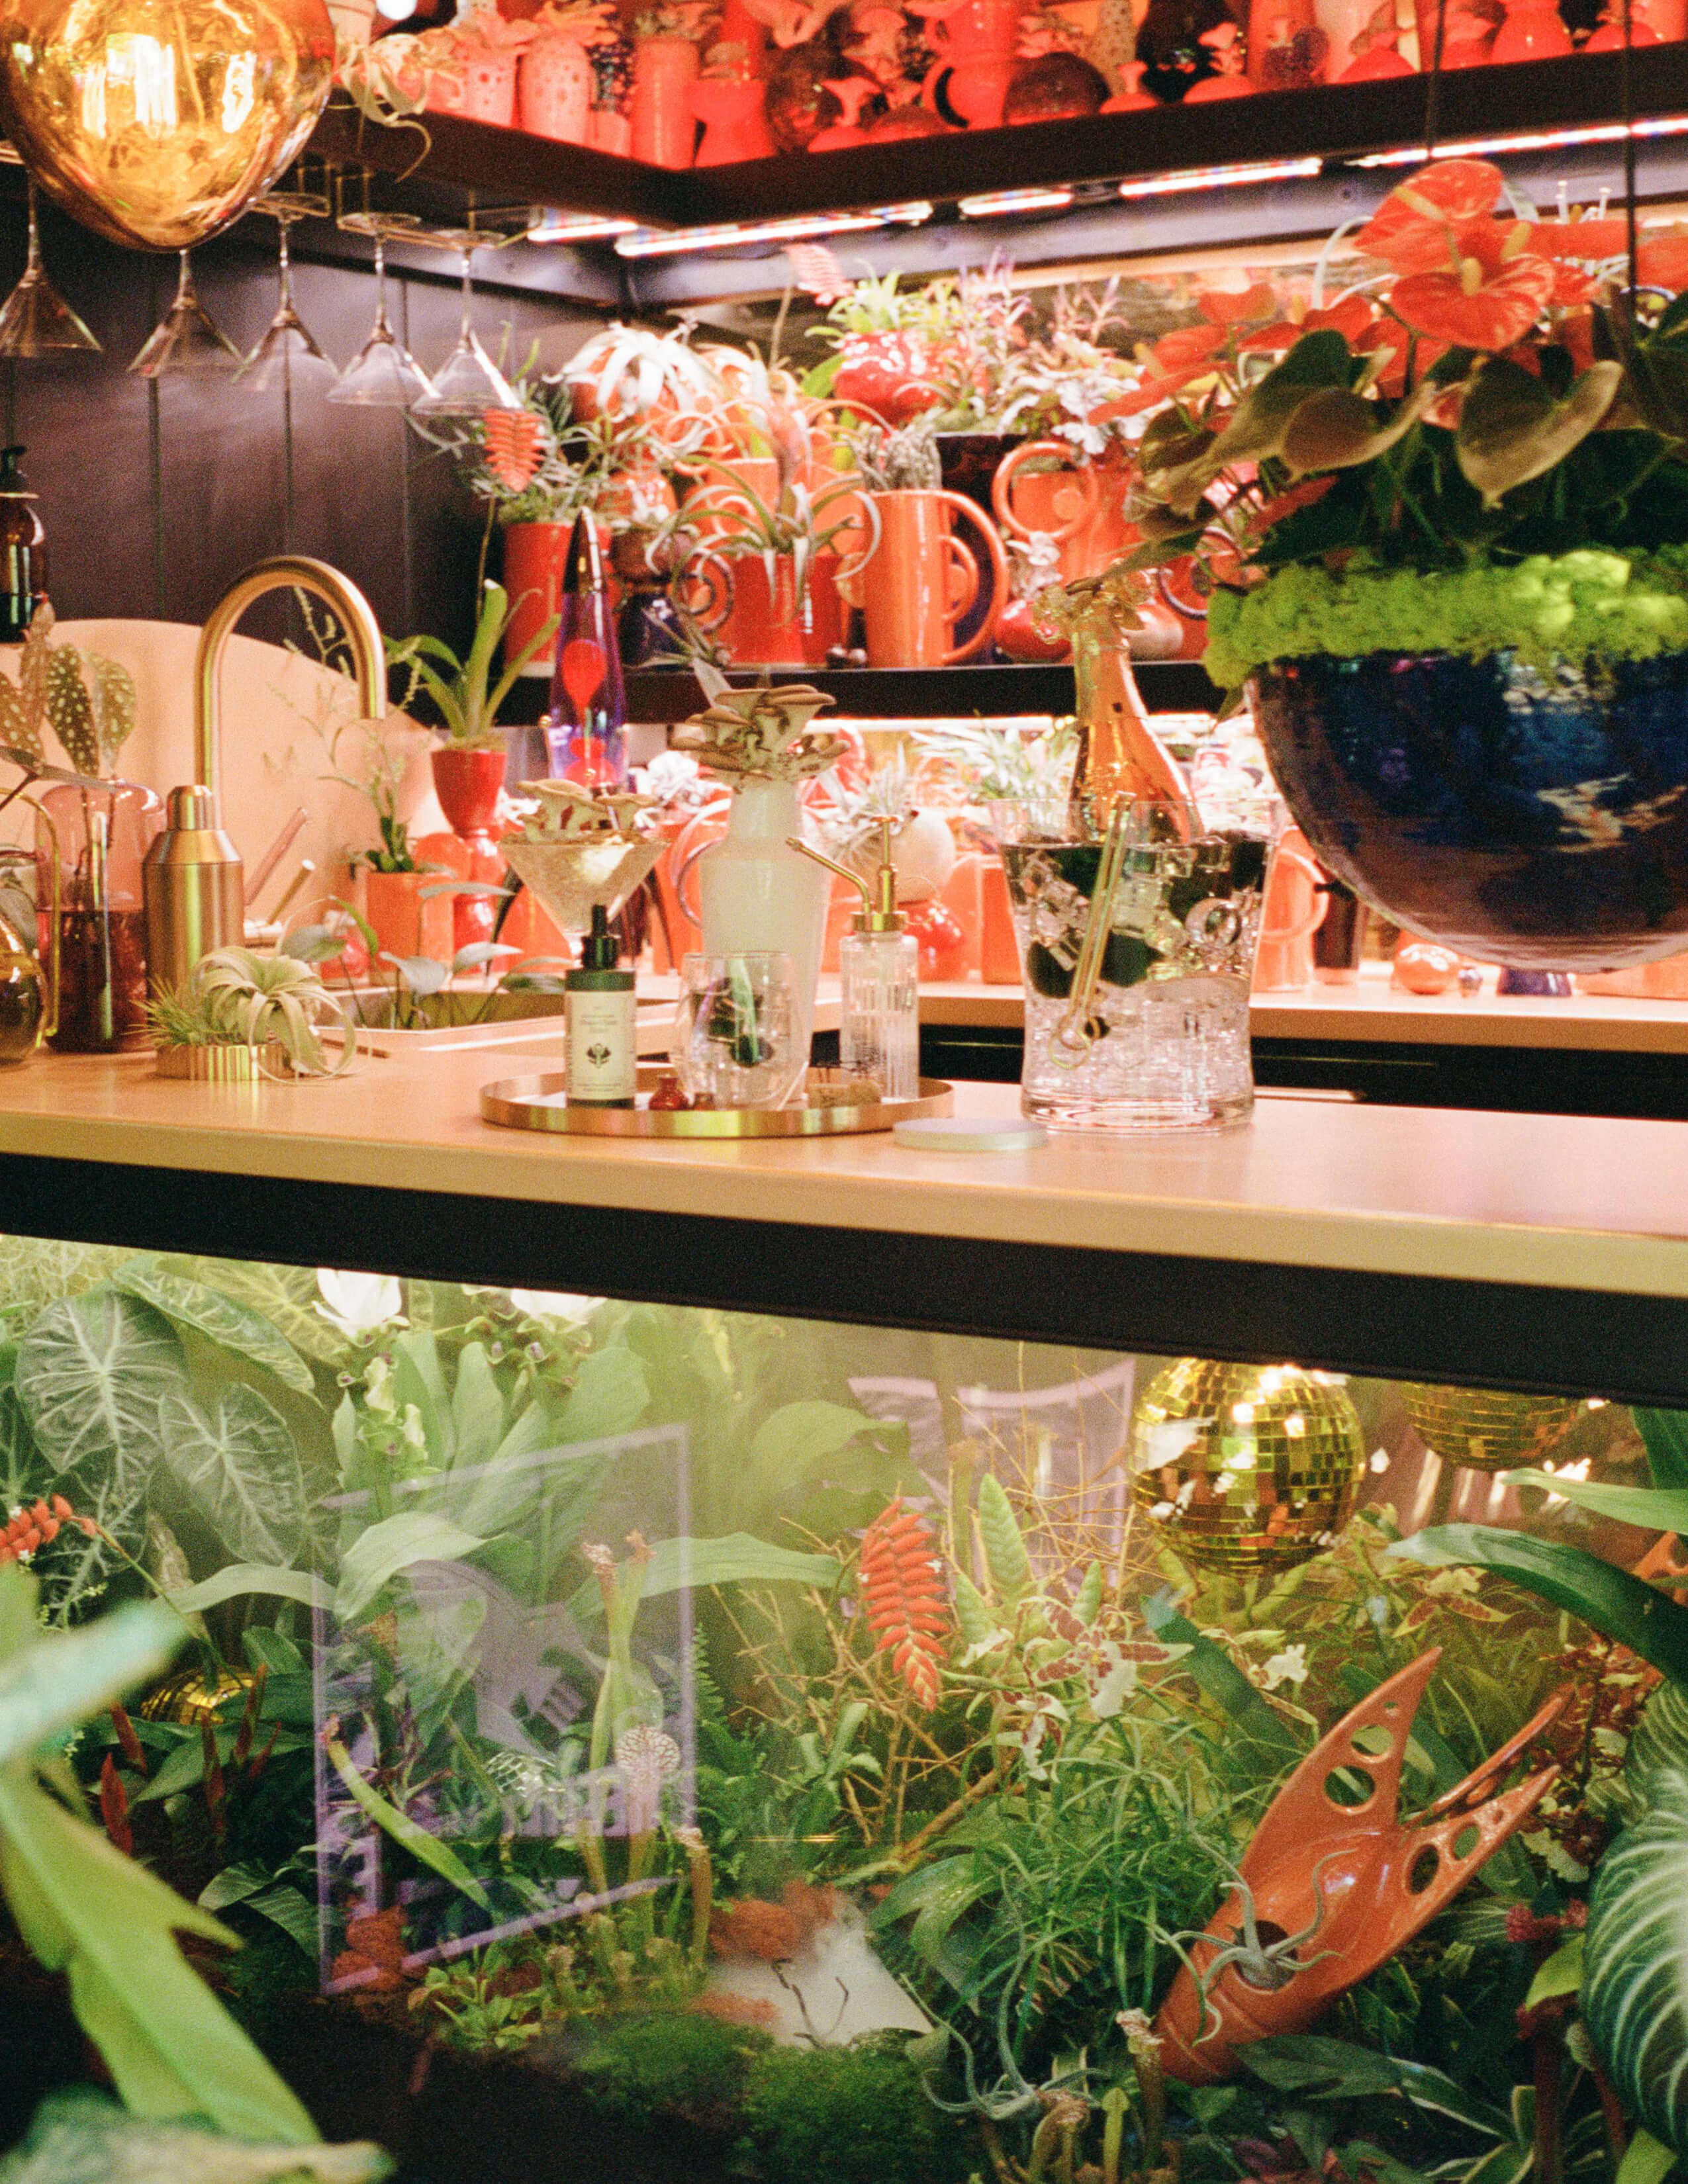 A collection of different kinds of plants in different vases filled up the whole shelf. A bottle of Sowvital house plant product on a golden tray next to various kinds of glassware on the table and there was a bottle of champagne in a glass bucket above the vivarium-like glass box that was filled with different kinds of plants.